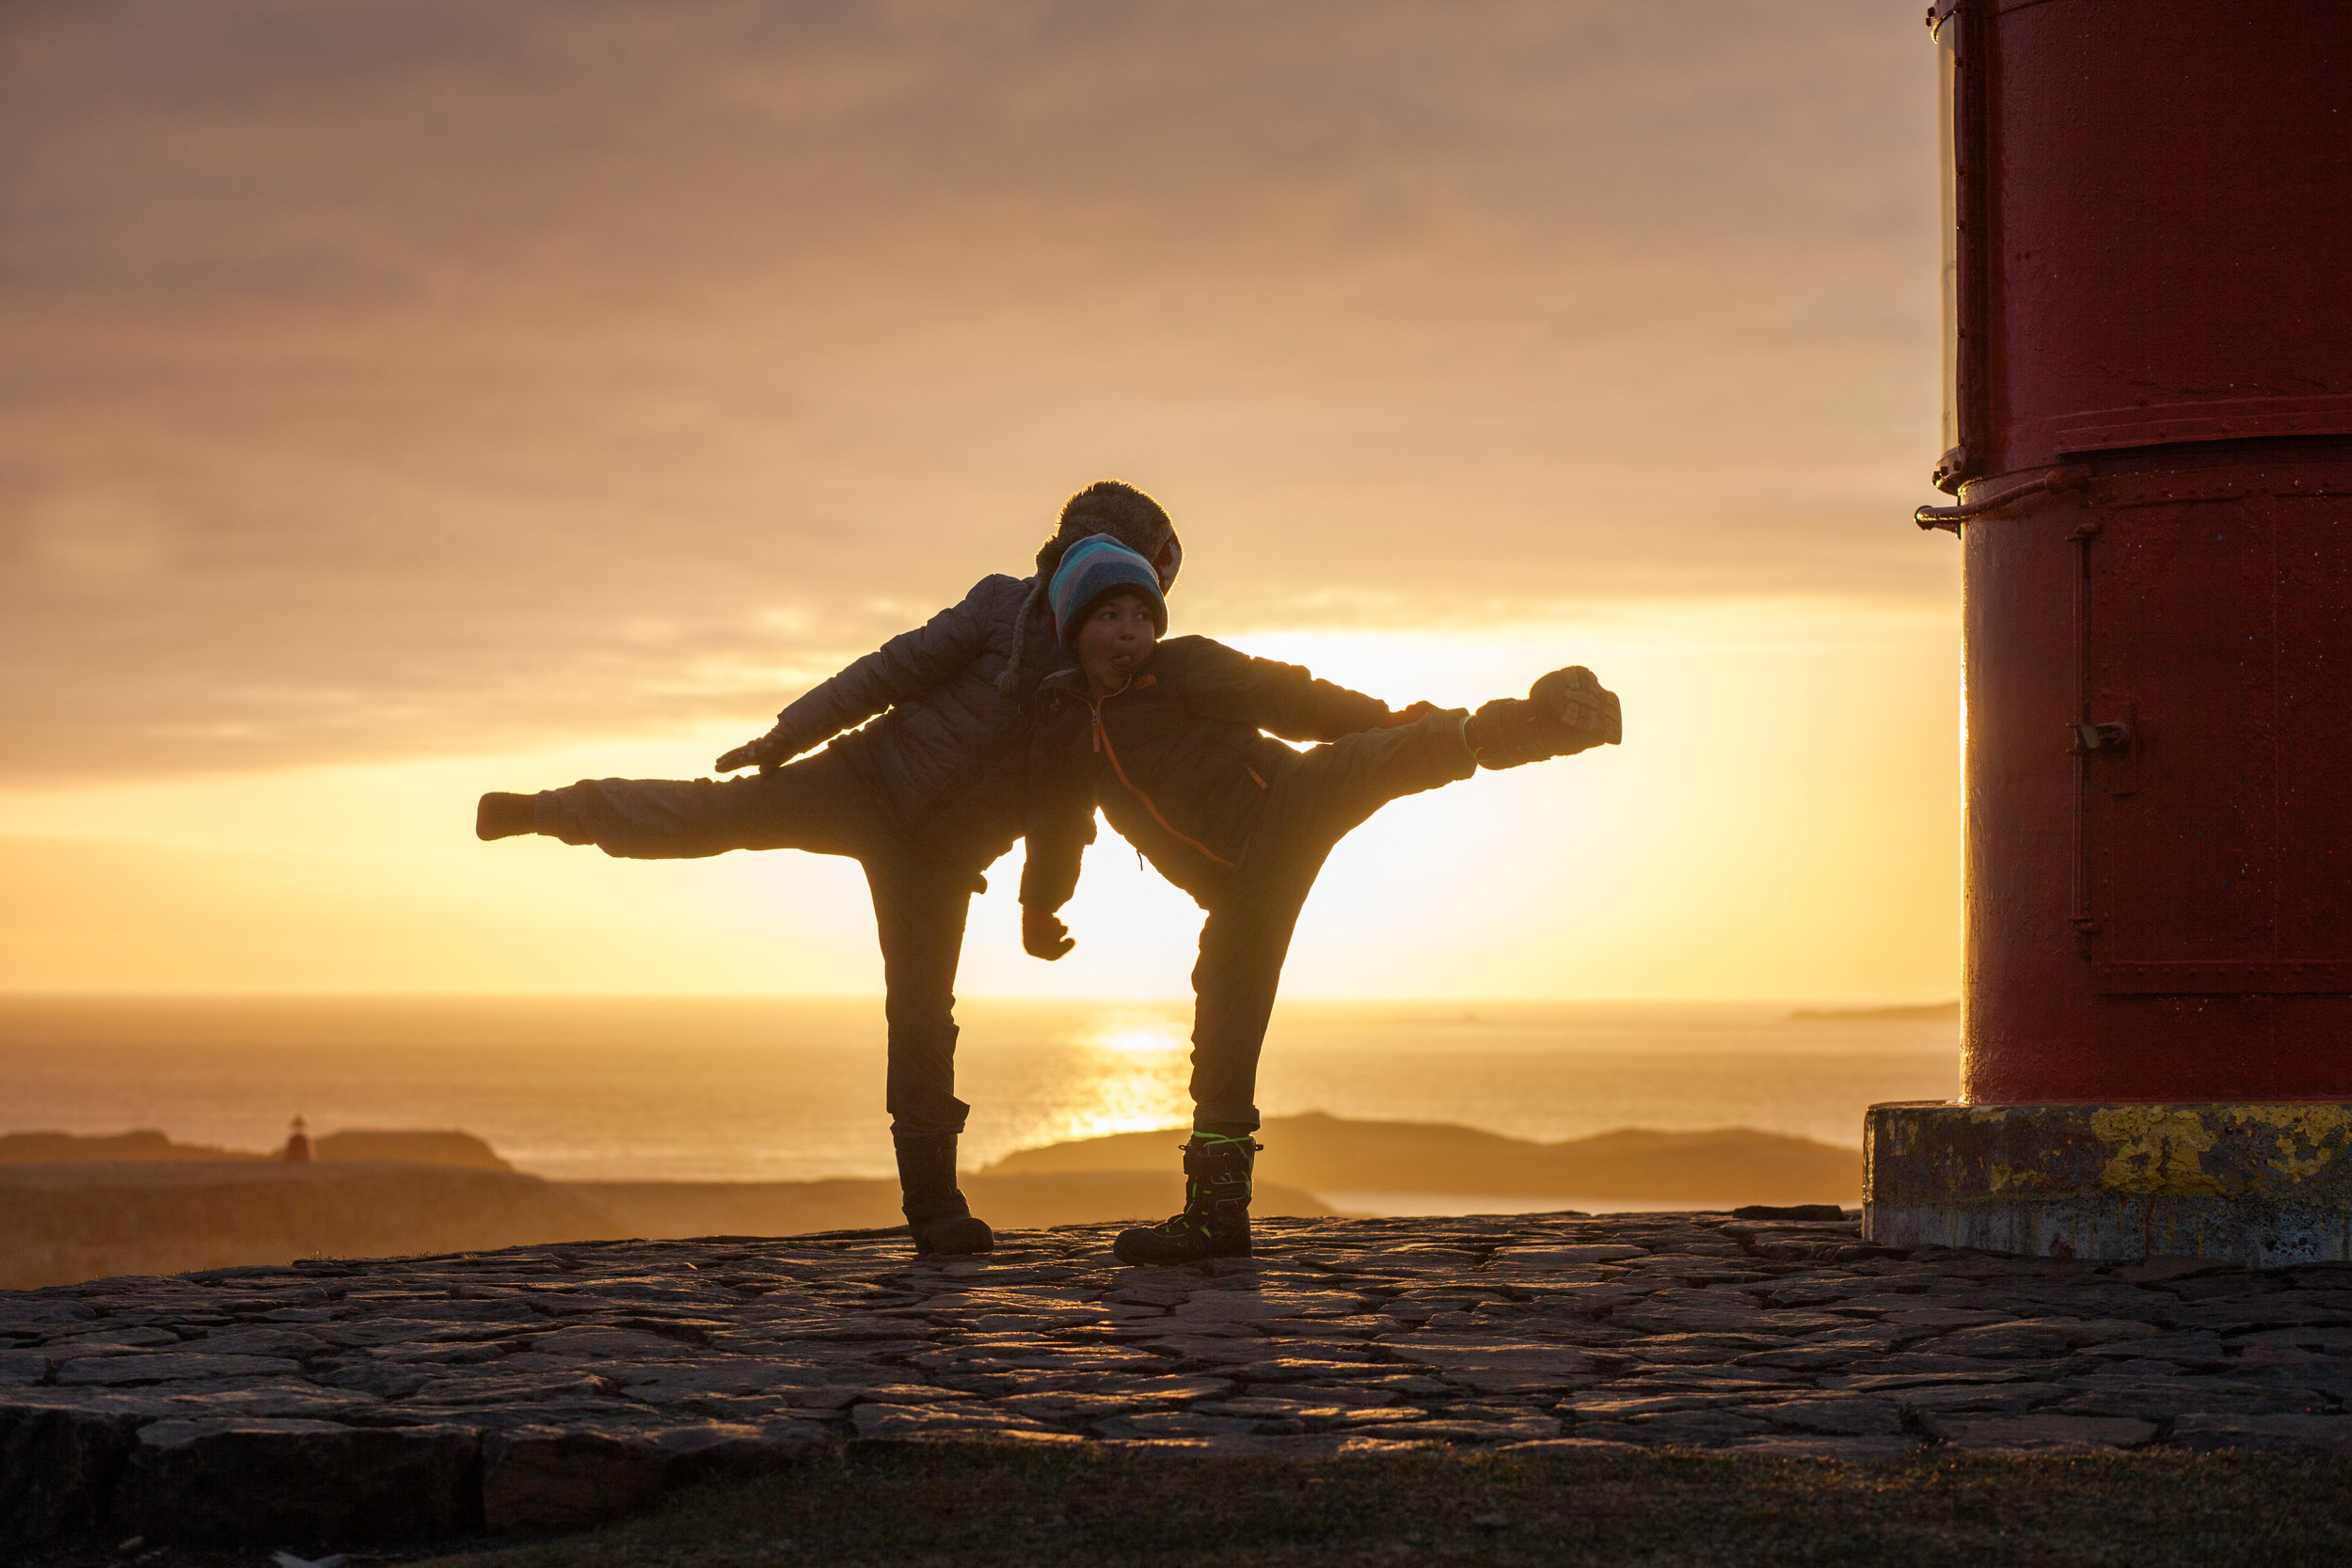 Sunset in Stykkisholmur might make you want to break out a Taekwondo kick or two.